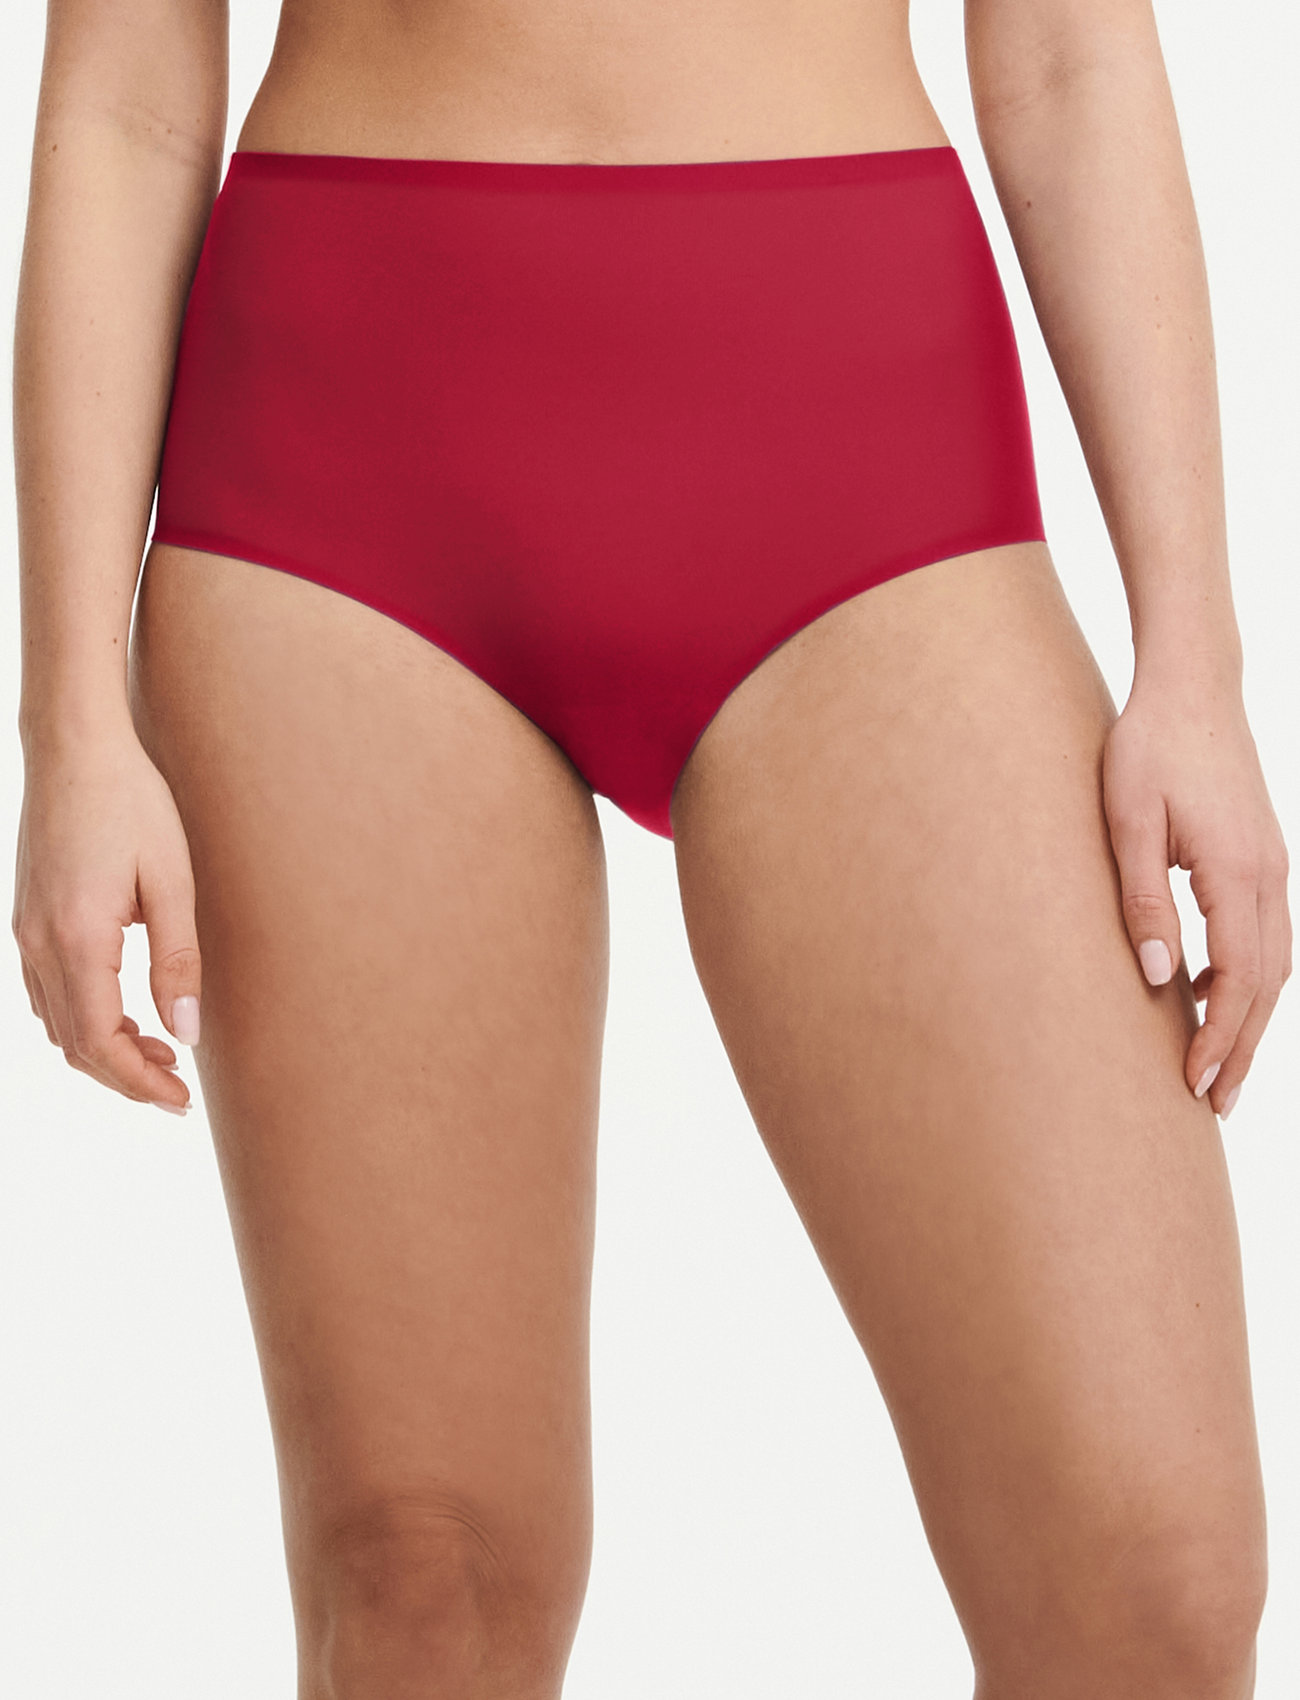 CHANTELLE - Softstretch High Waist Brief - naadloze slips - passion red - 1